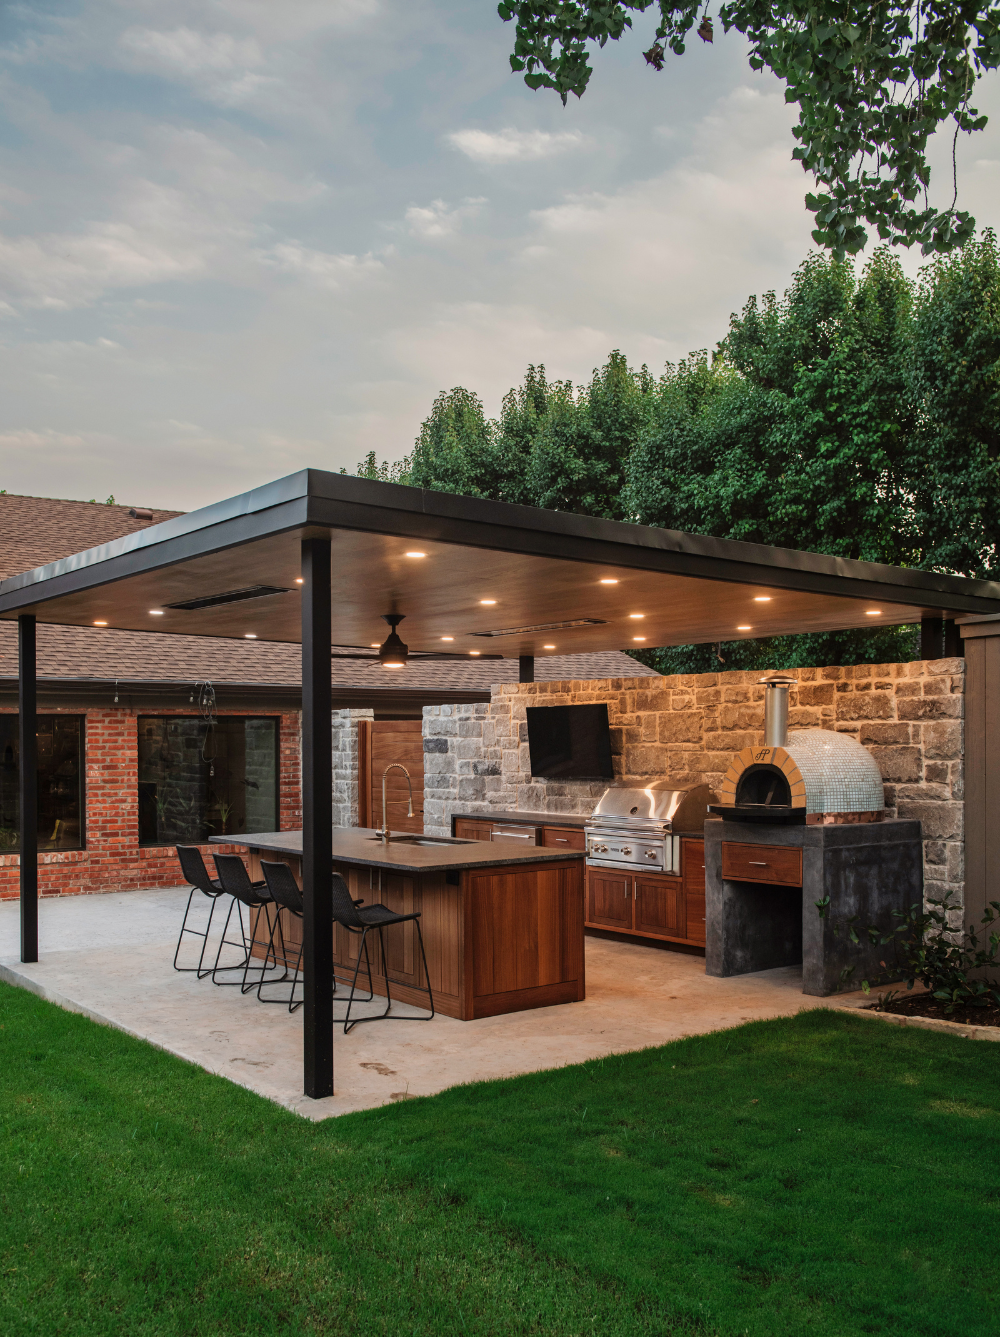 Creative Ways to Design an Outdoor Kitchen on Your Patio